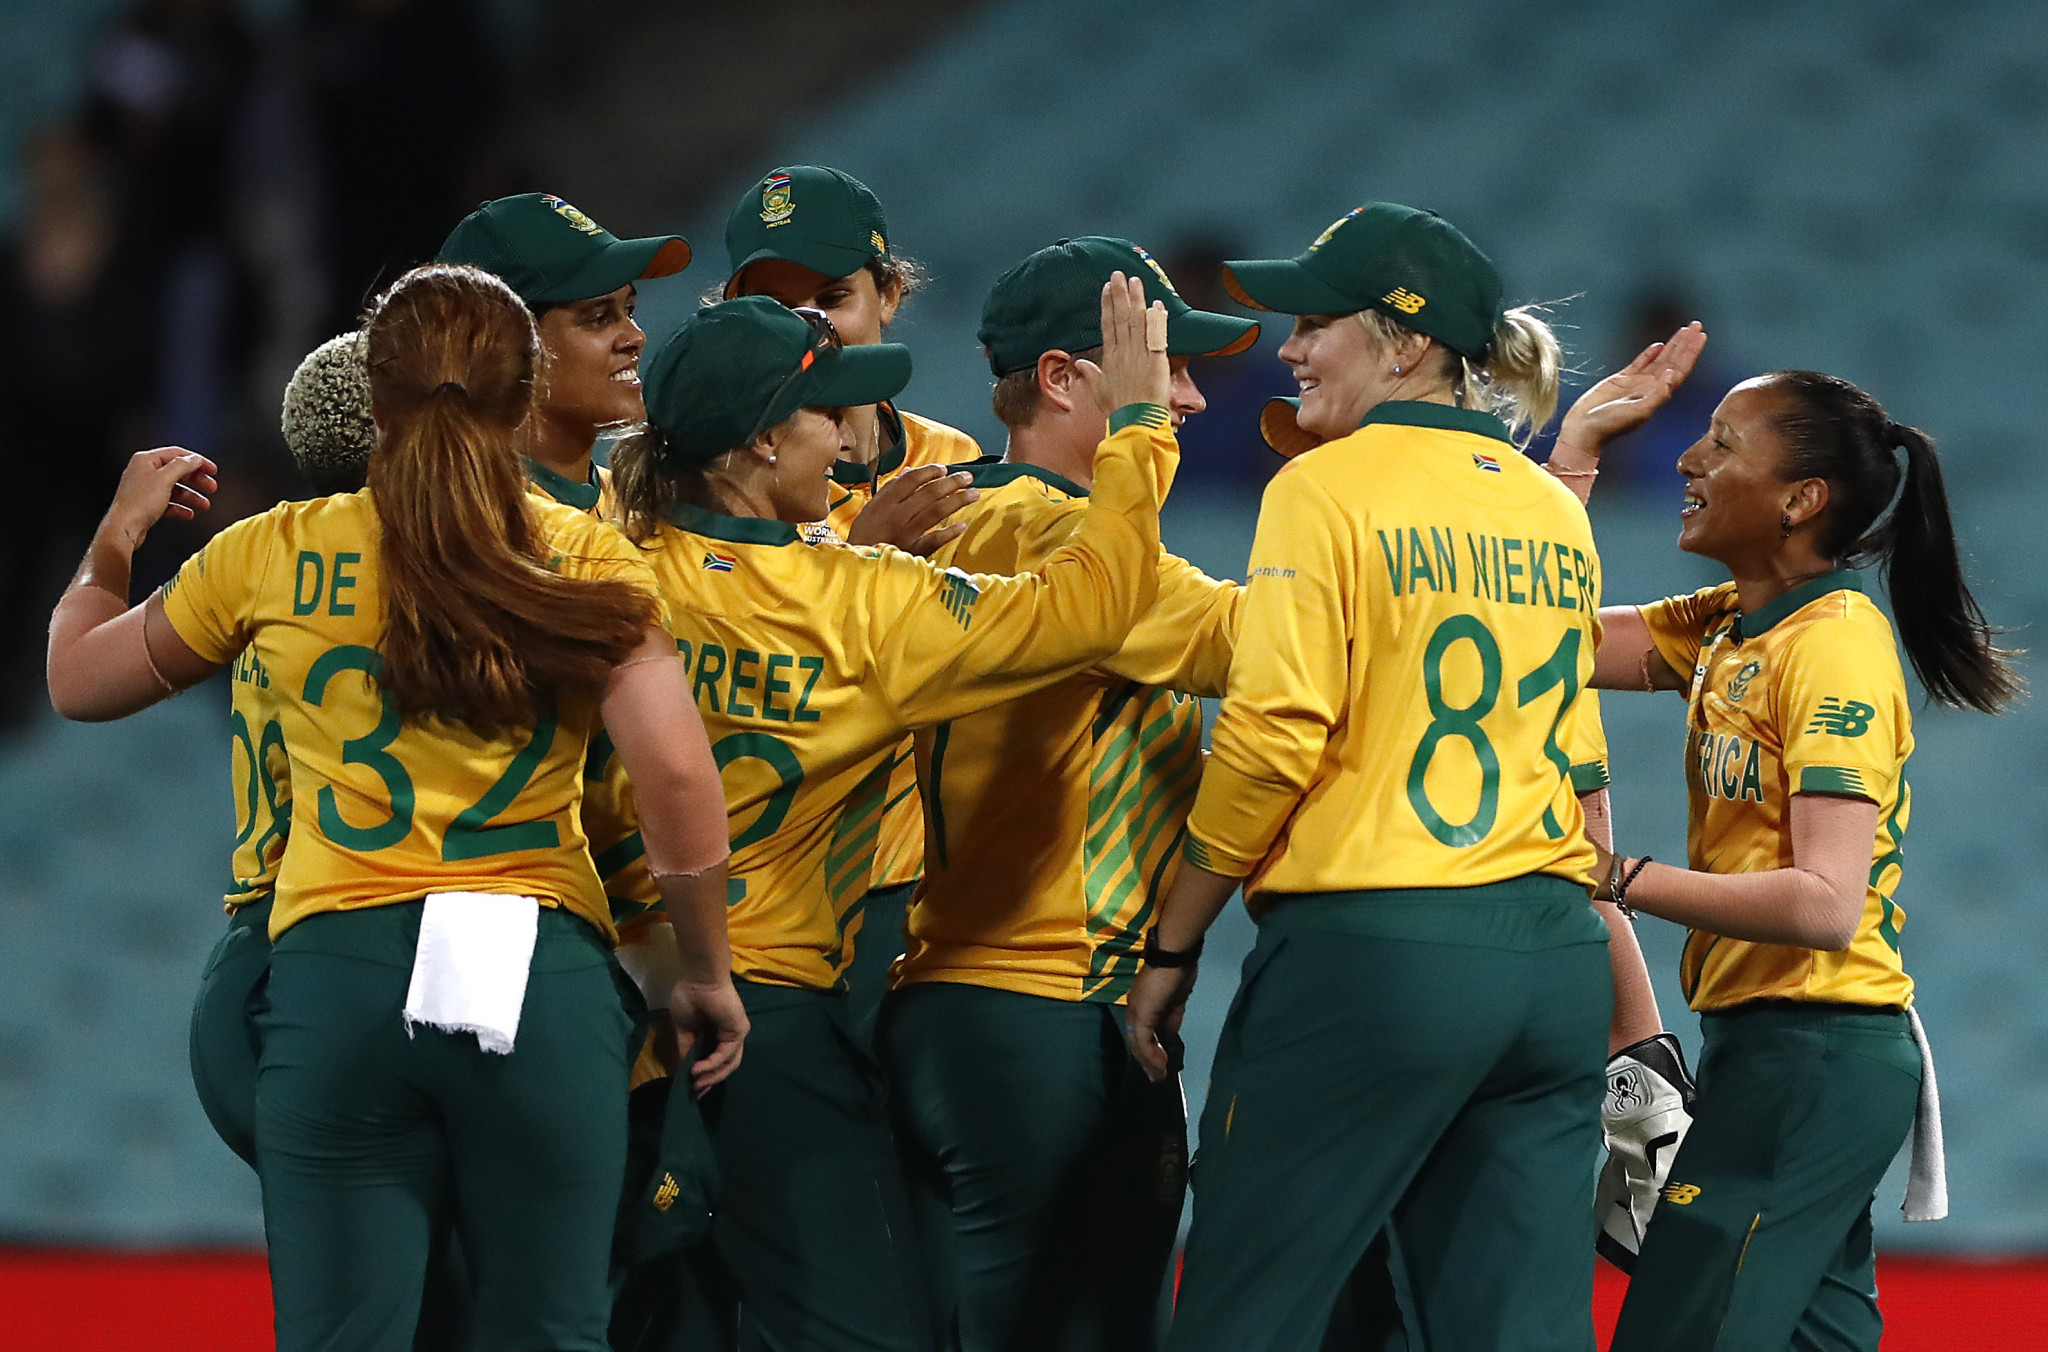 South Africa reached the semi-finals of the last Women's T20 World Cup in 2020, and are set to host the next edition in February of this year ©Getty Images